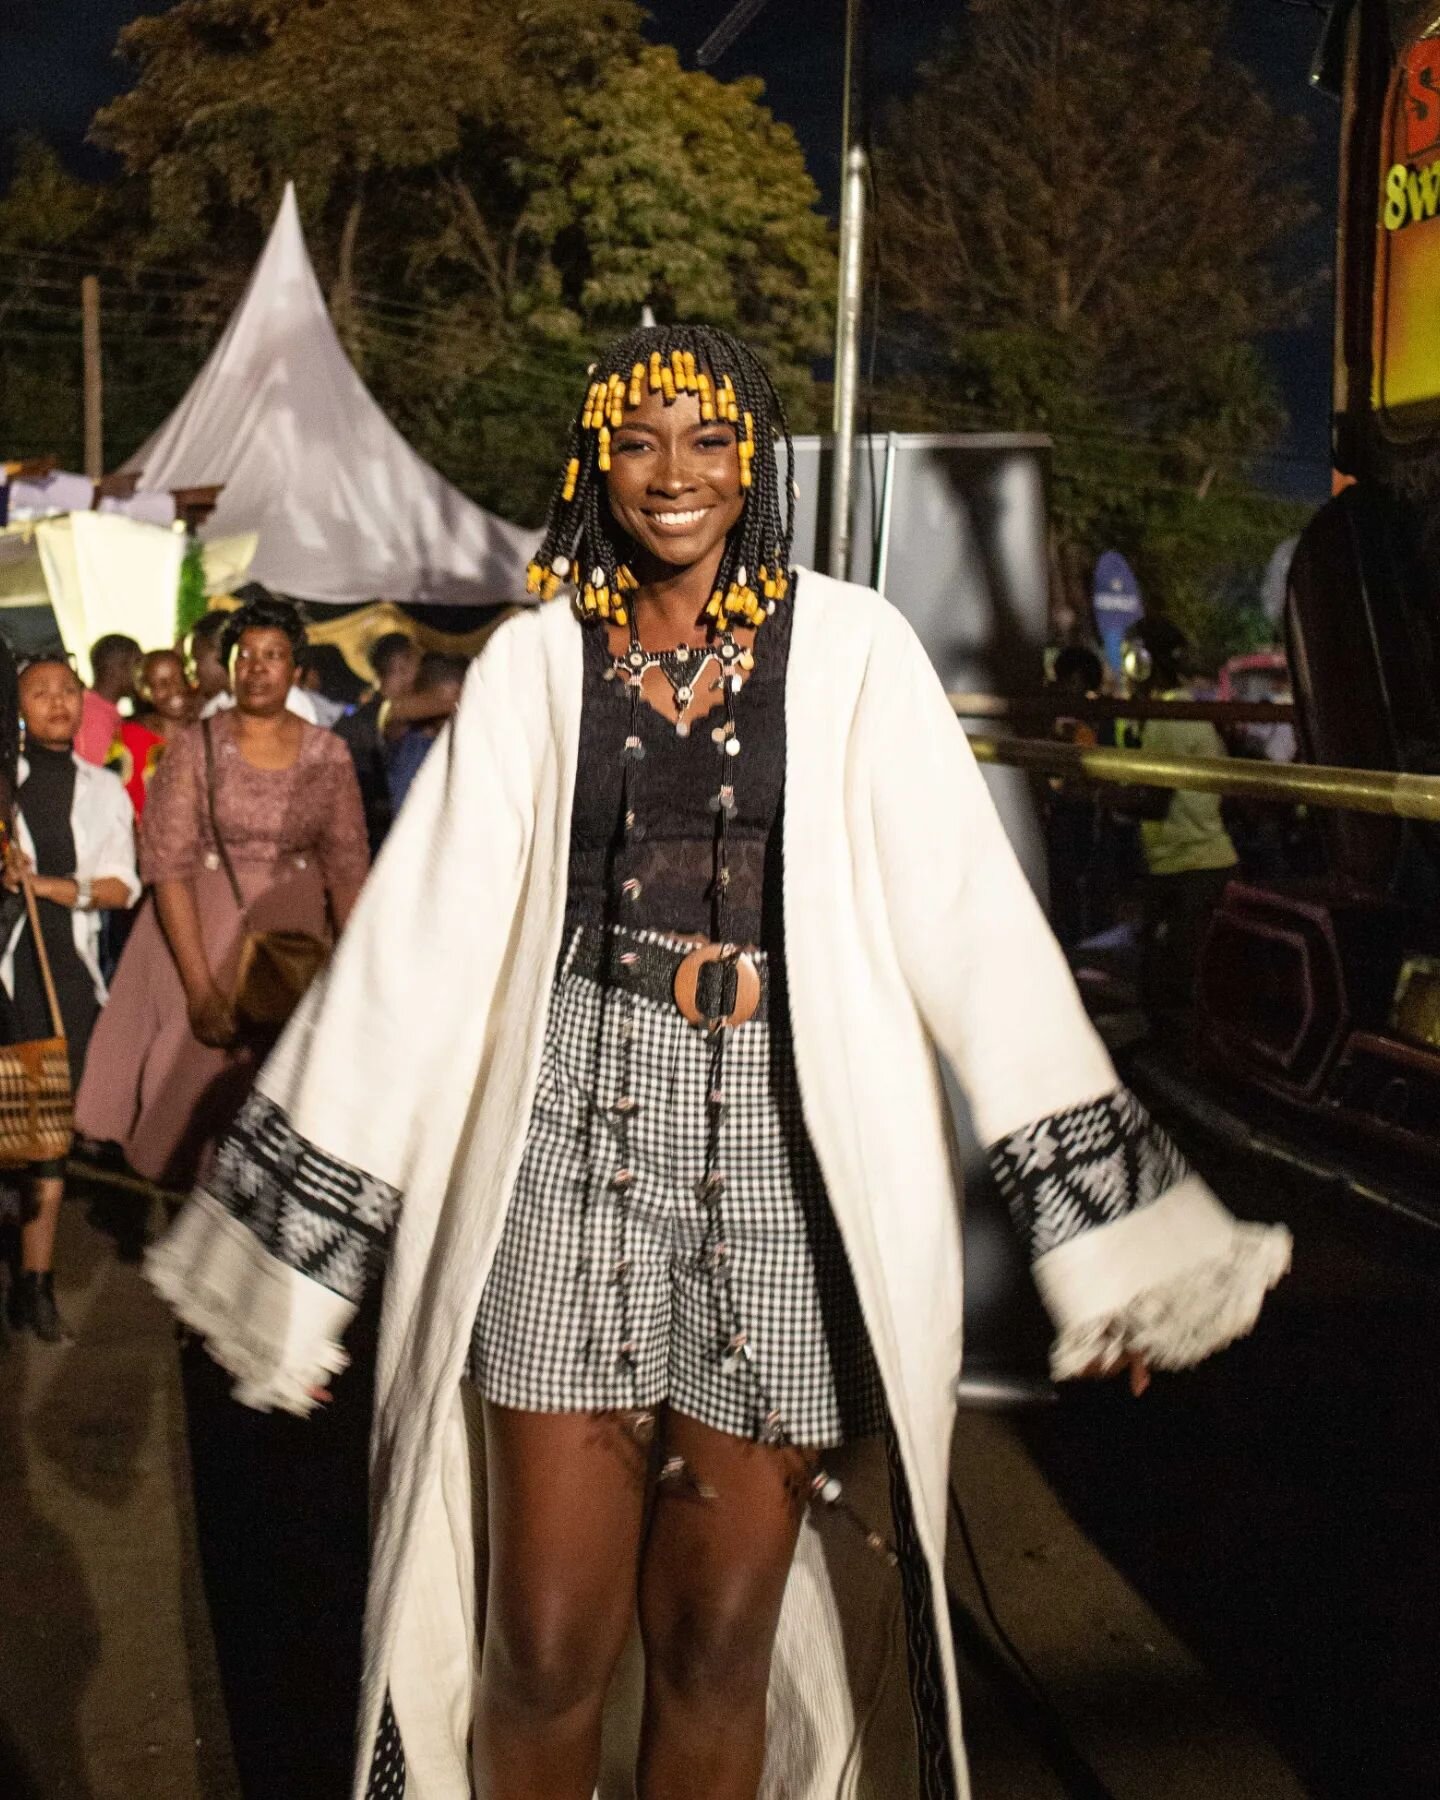 Shoutout to the amazing @idahgarette for rocking our  kimono at @kiberafashionweek ! ✨

The exquisite kimono design was crafted by @yurisadia and our talented students @muthemba.m and @_wairuri , all from upcycled curtains! 😍

#maishabynisria #custo